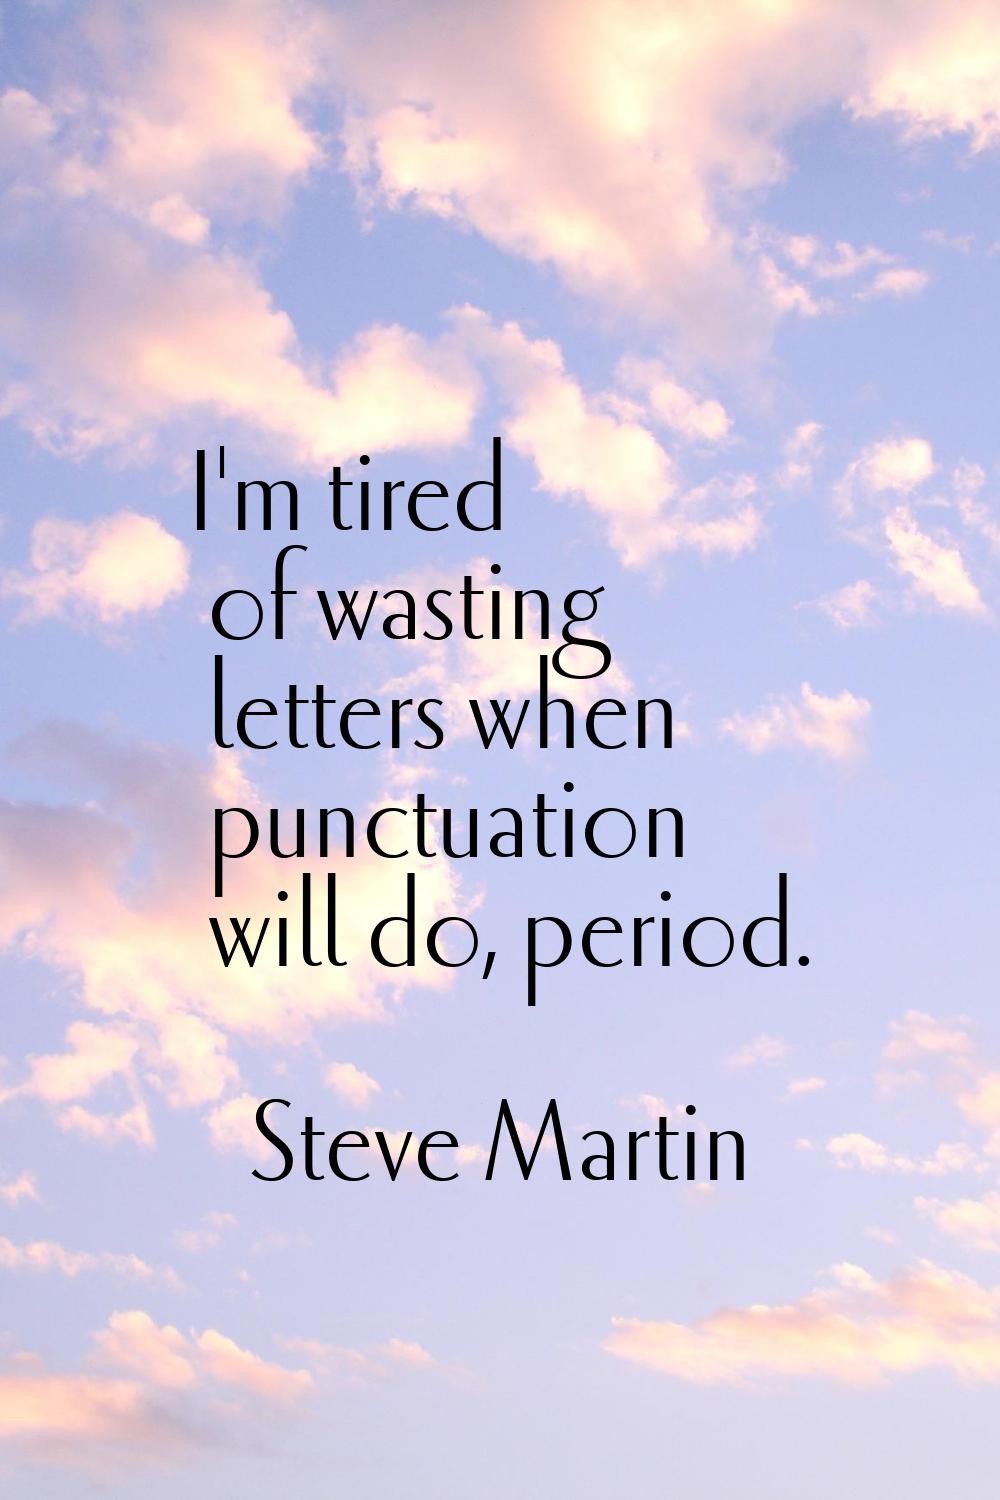 I'm tired of wasting letters when punctuation will do, period.